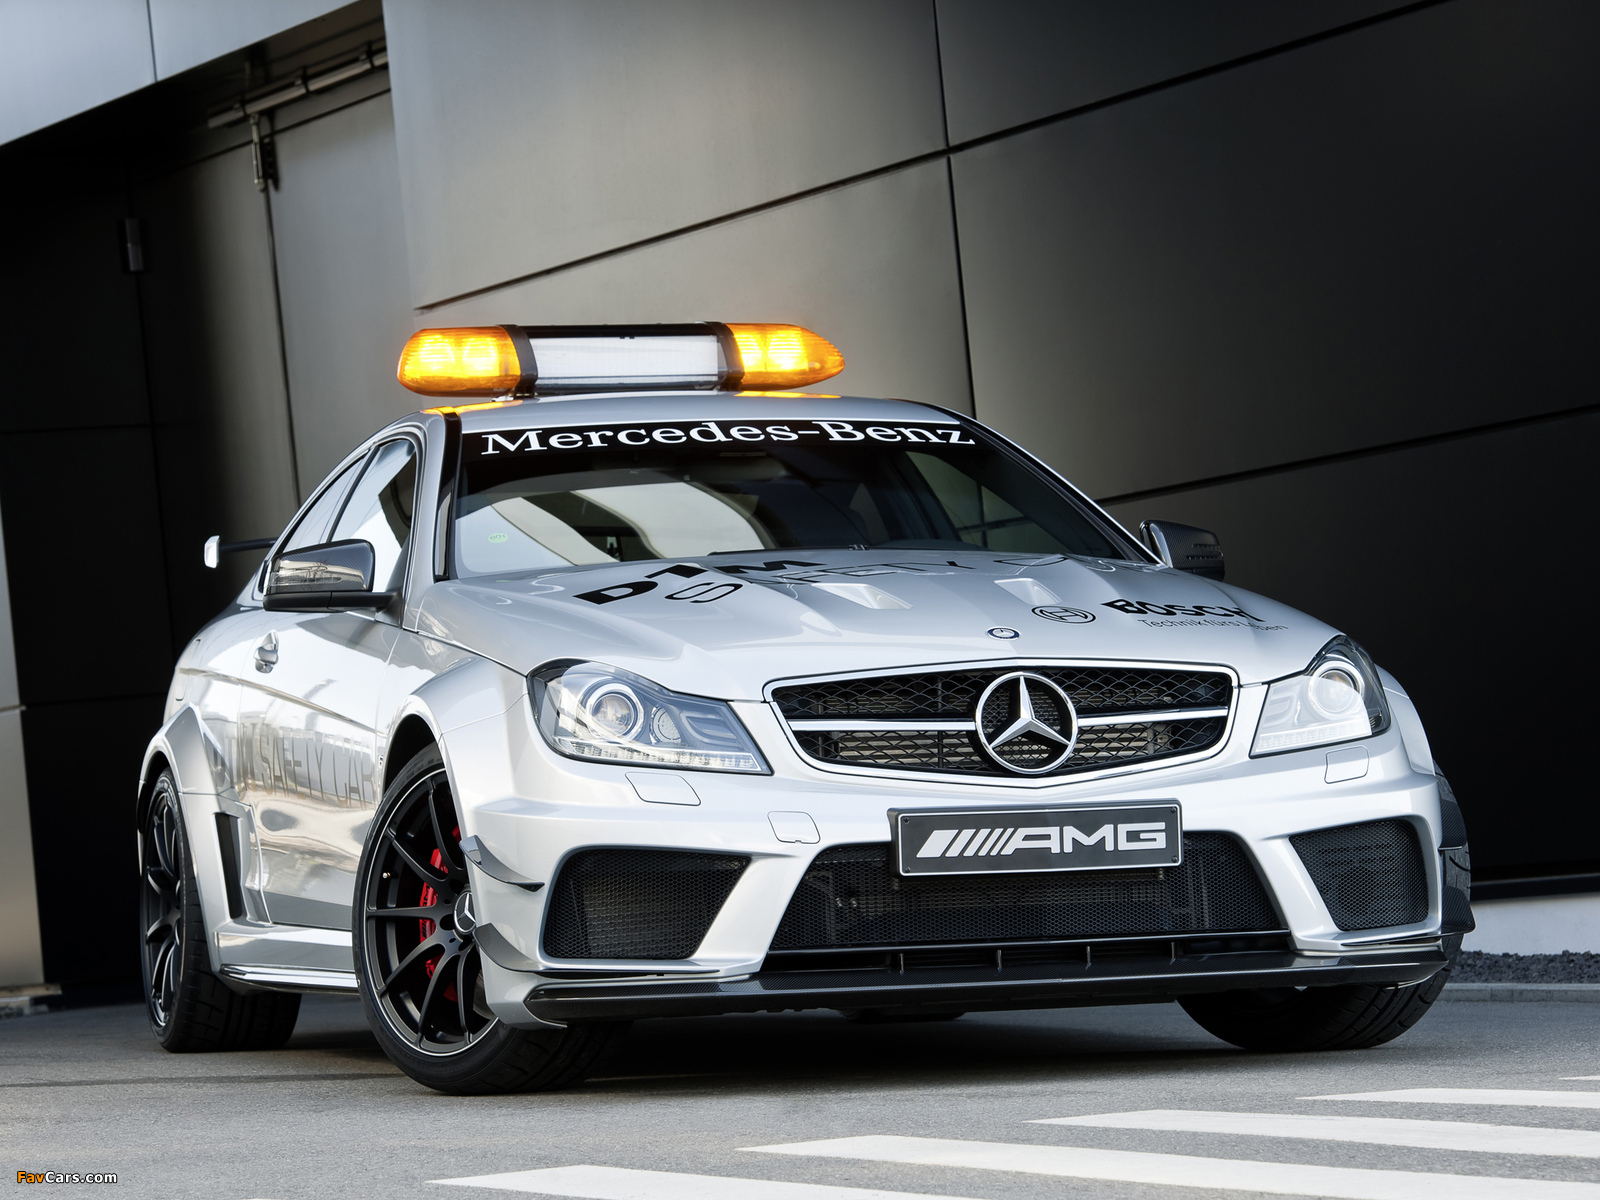 Mercedes-Benz C 63 AMG Black Series Coupe DTM Safety Car (C204) 2012 wallpapers (1600 x 1200)